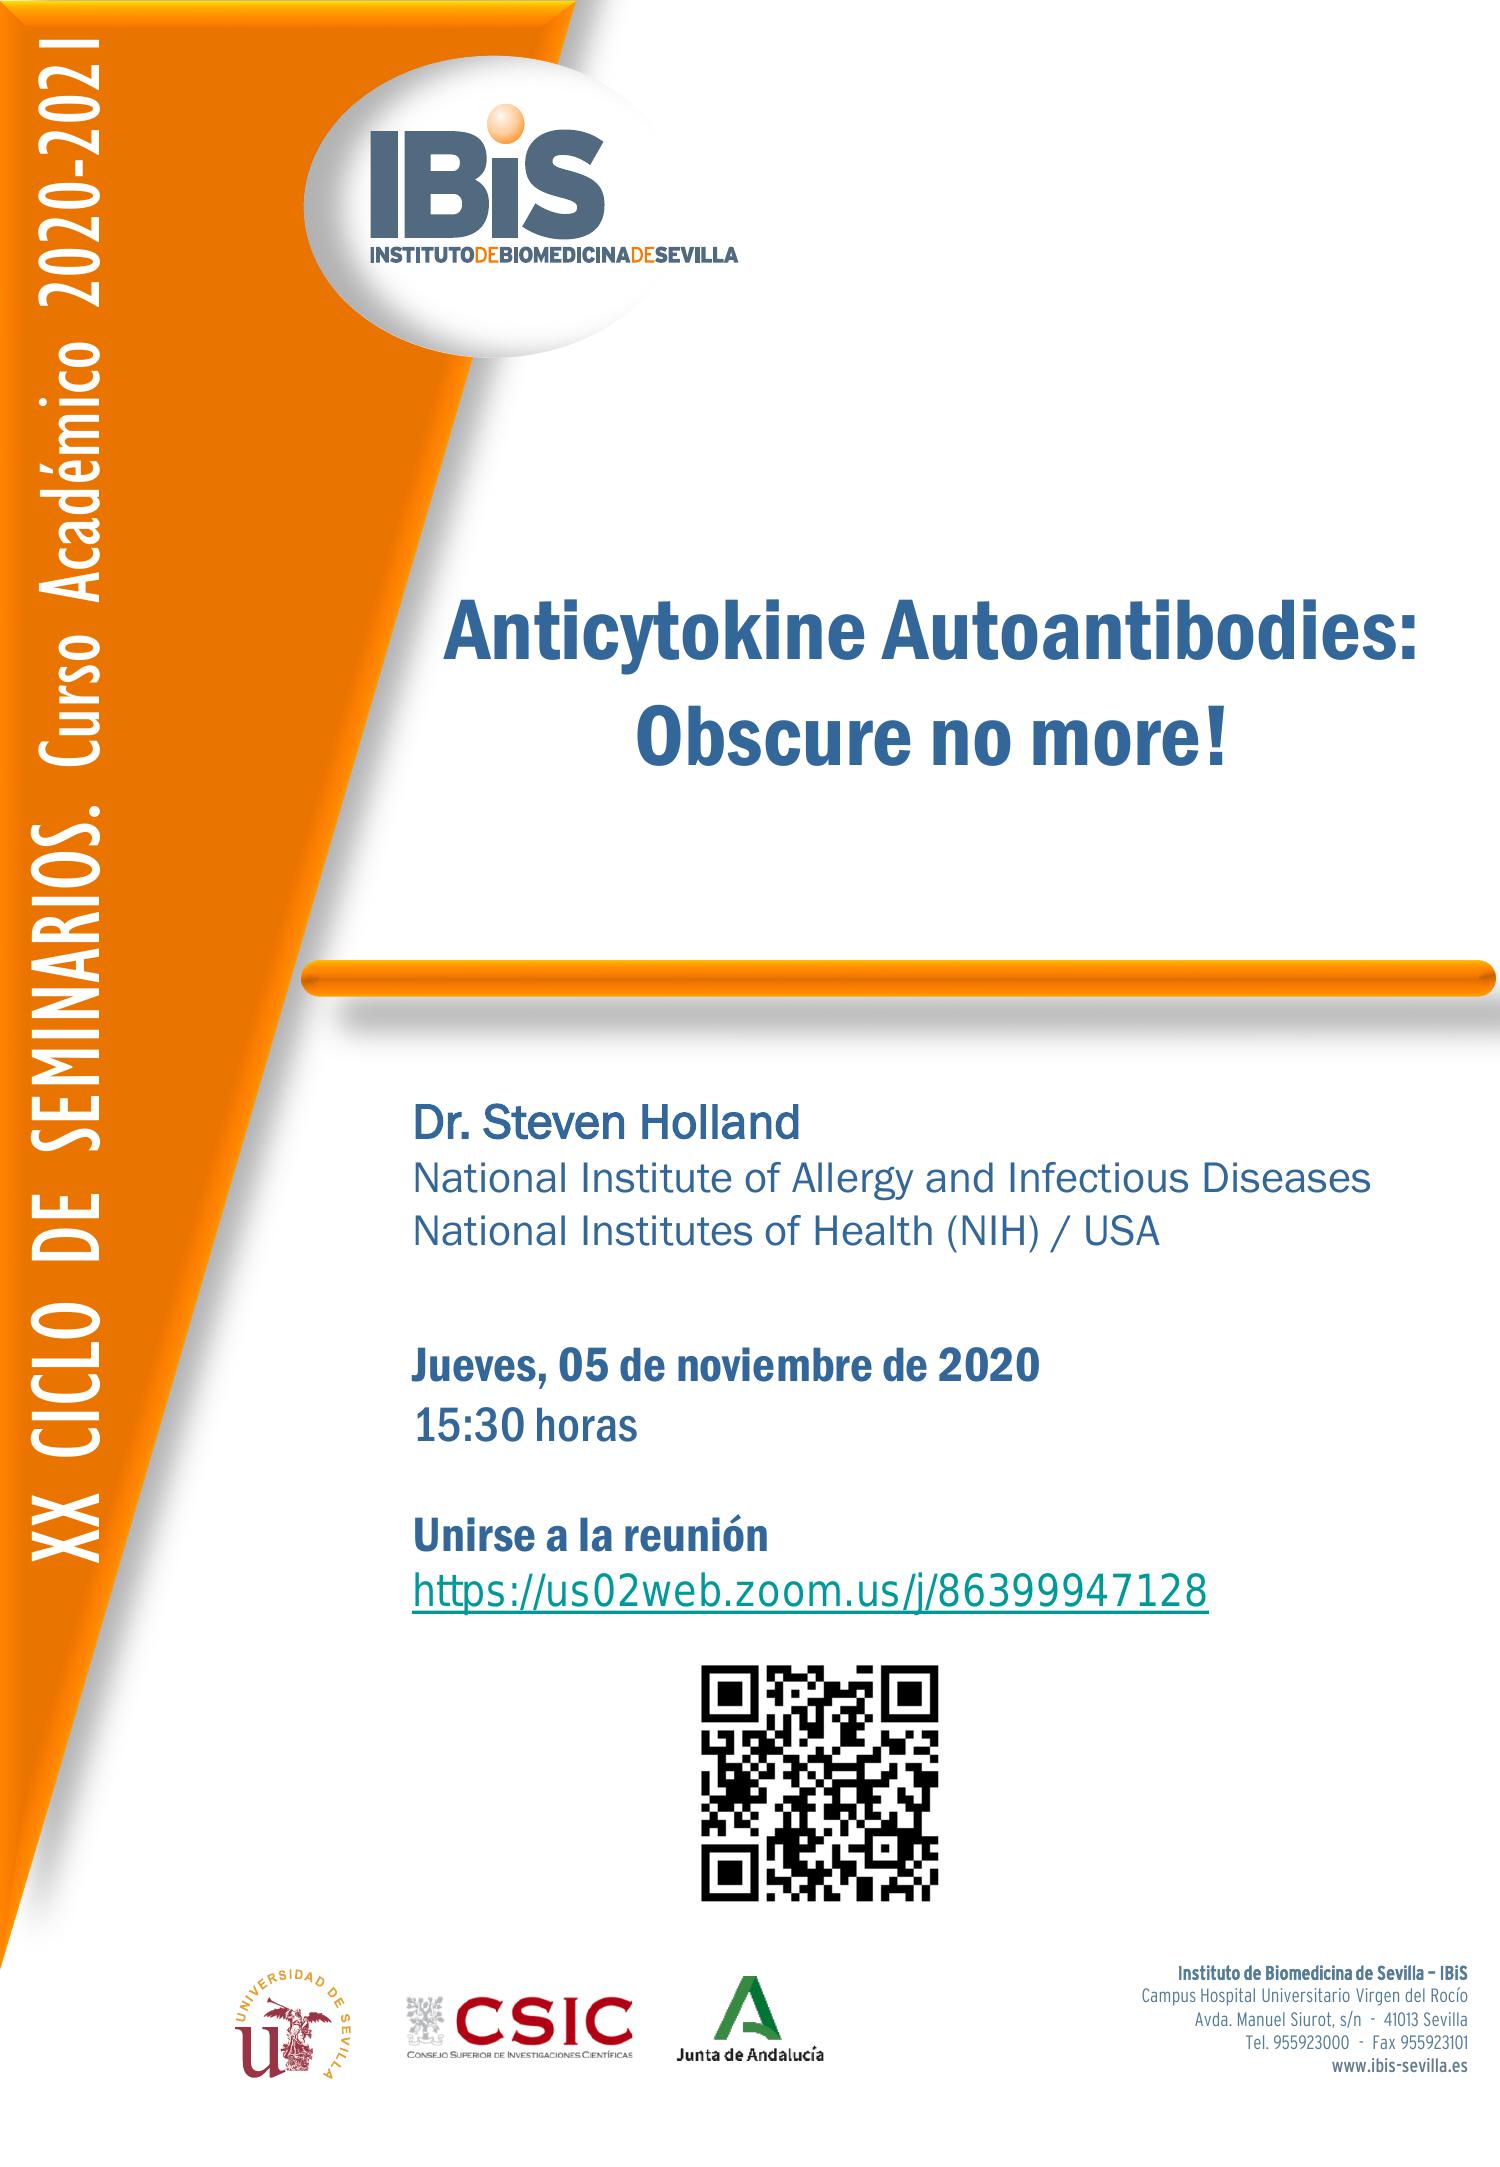 Poster: Anticytokine Autoantibodies: Obscure no more!